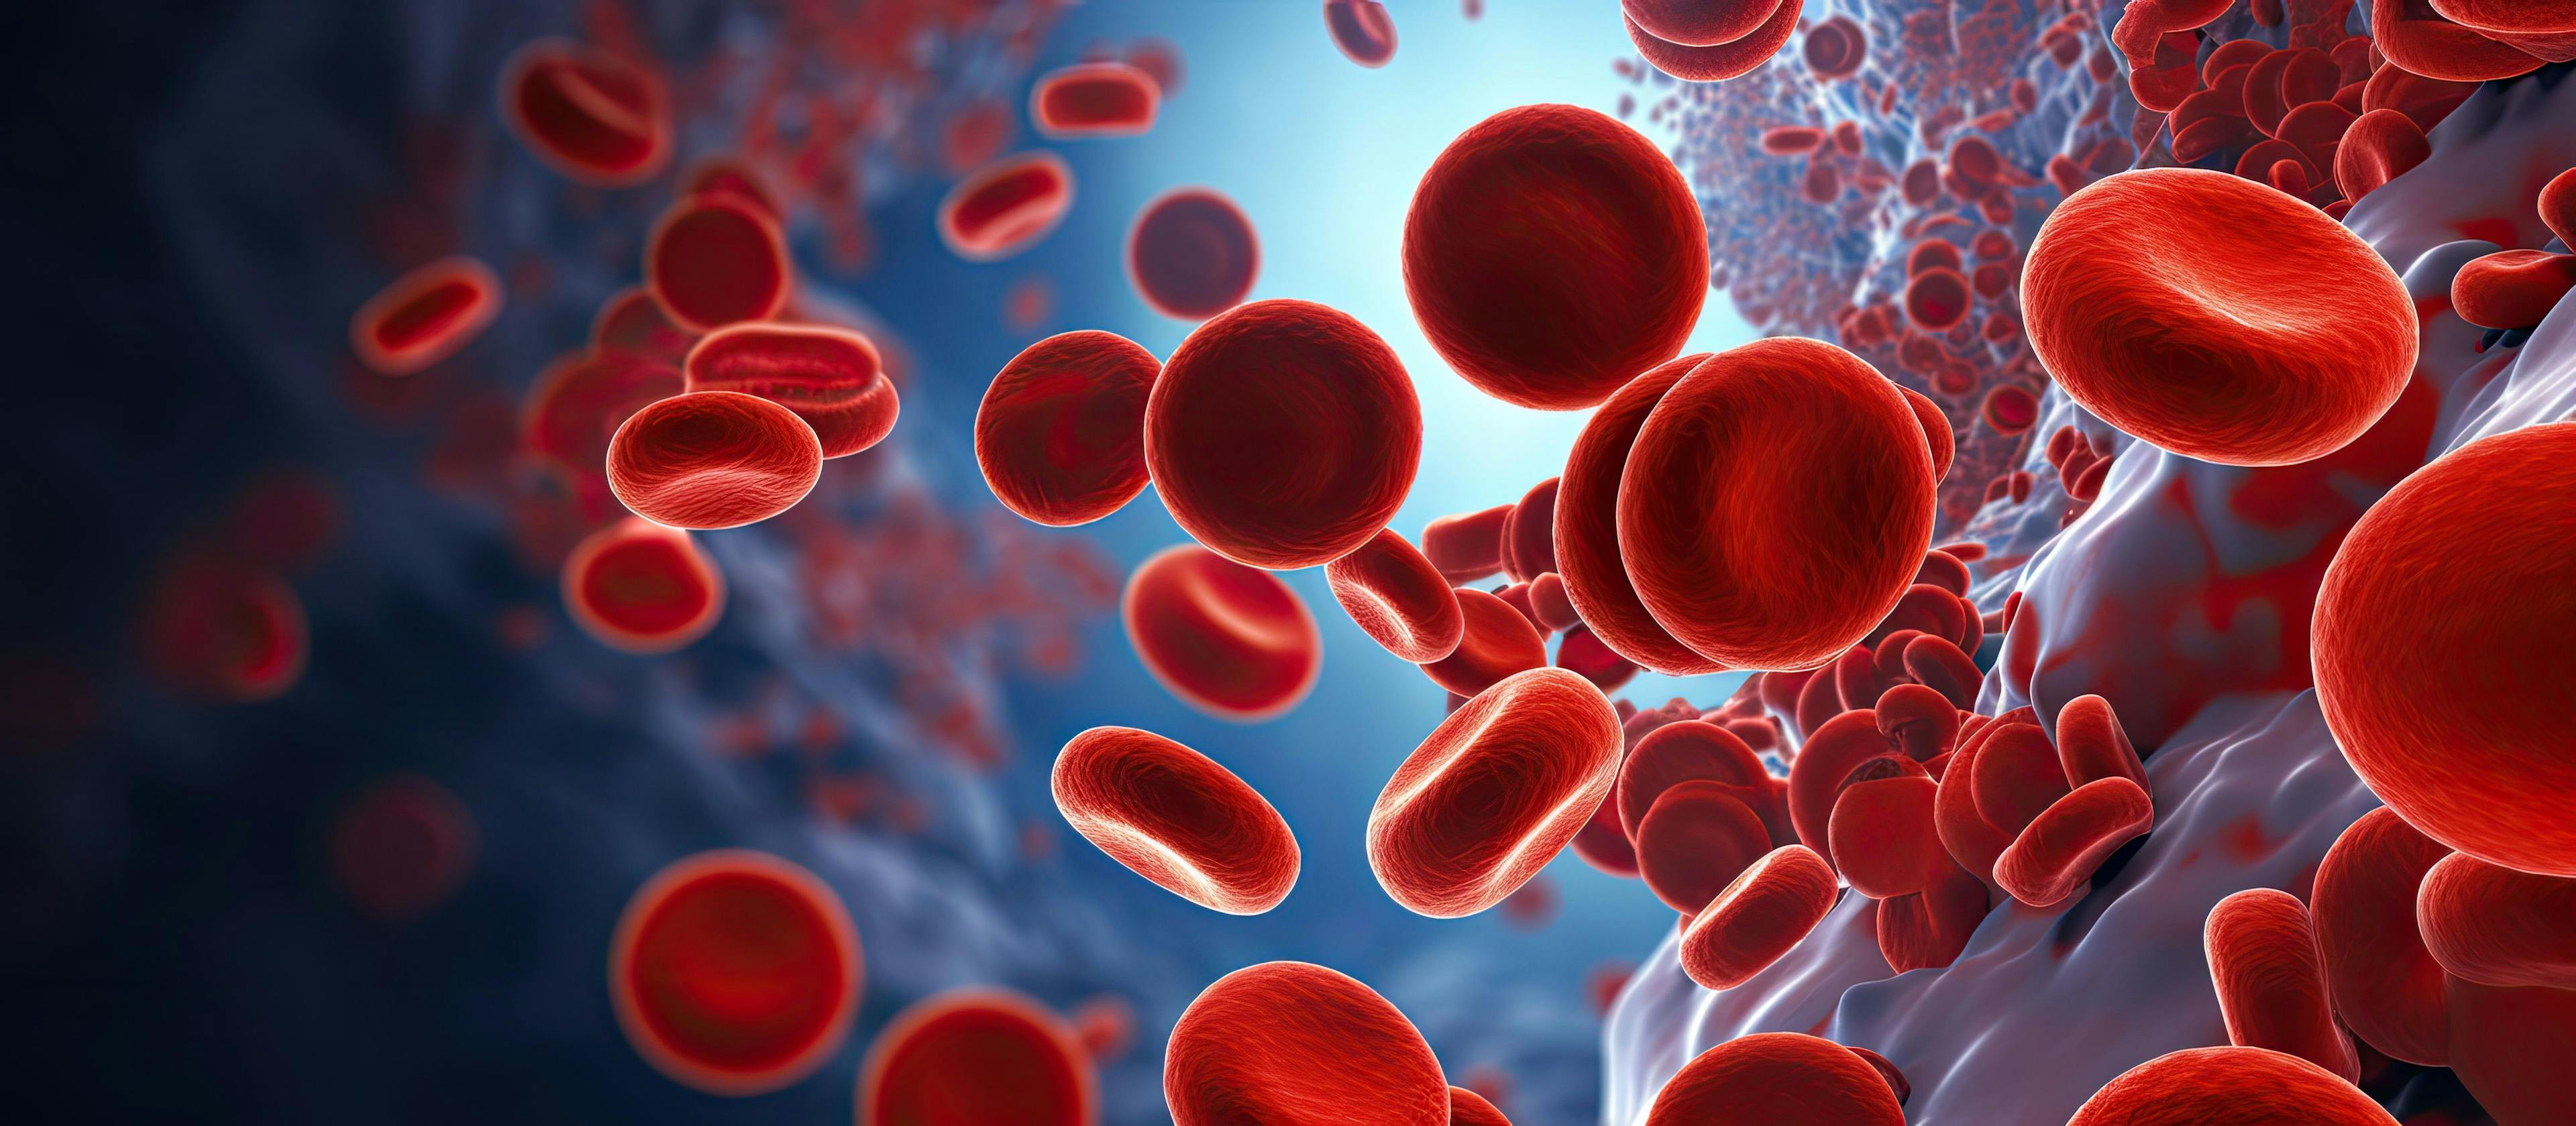 Microscopic images of red blood cells activated platelets and white blood cells are showcased in the photographs as a result of leukemia: © AkuAku - stock.adobe.com